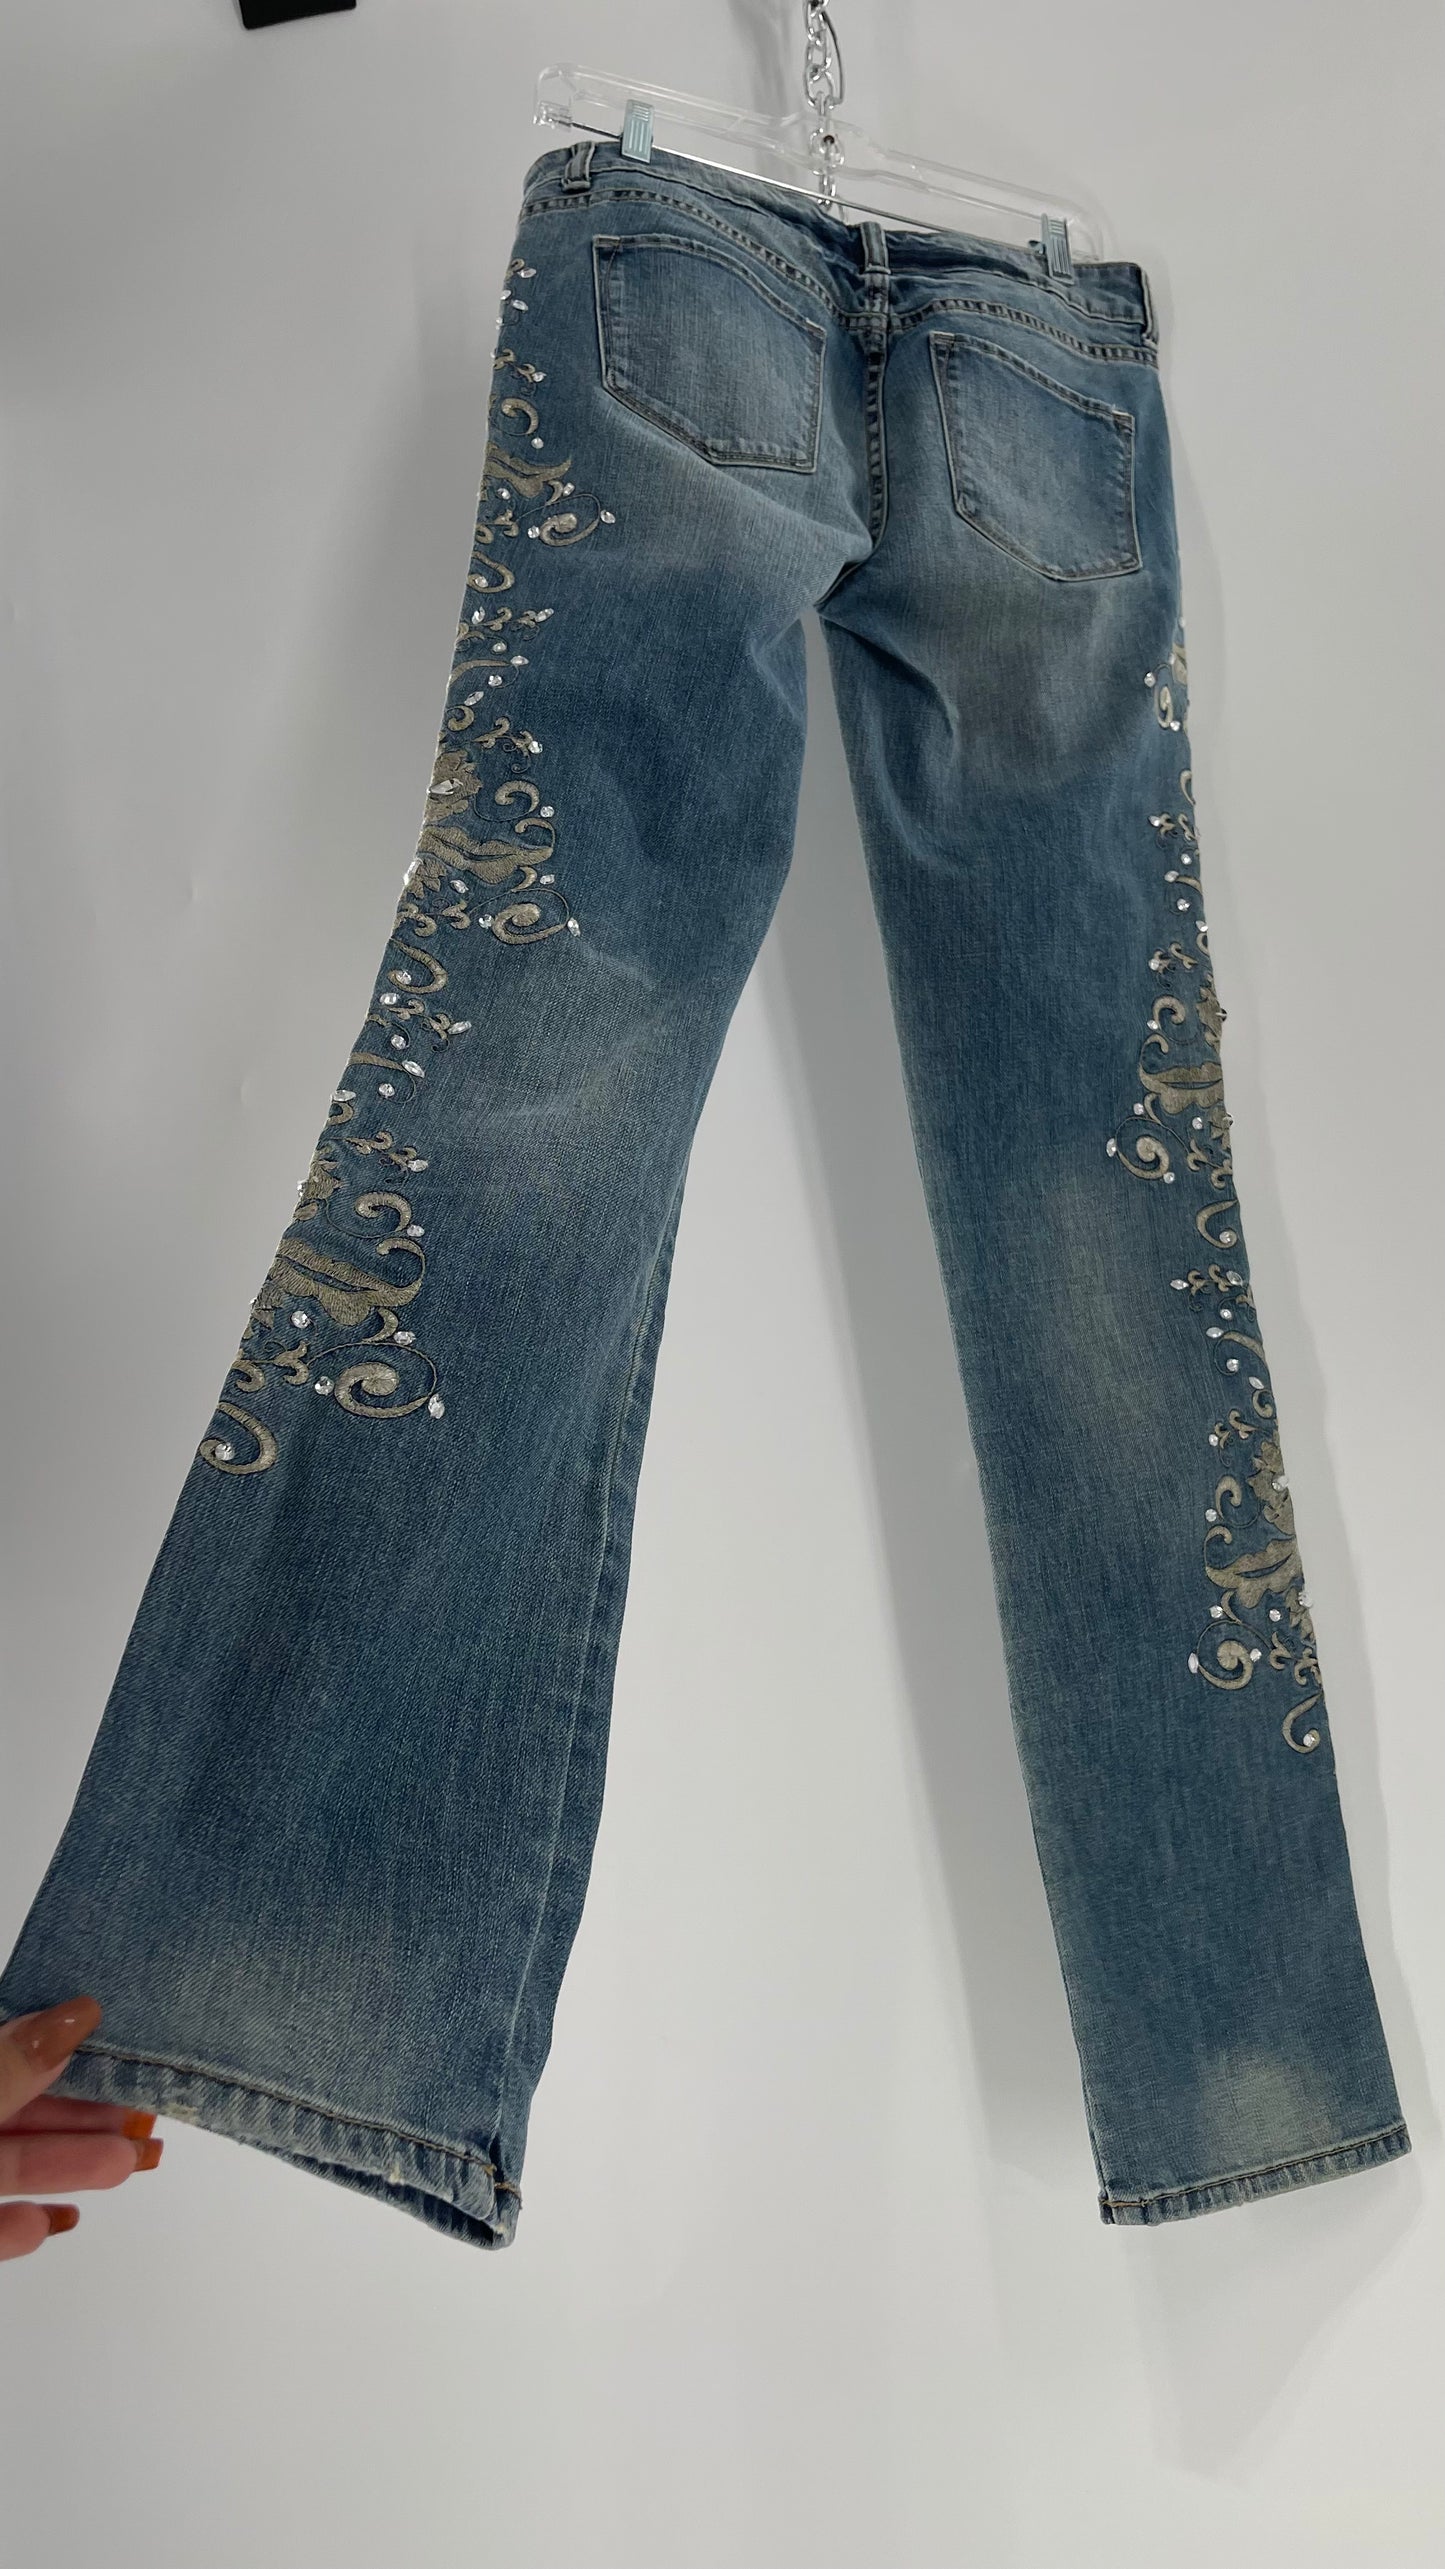 Jean London Jean Light Wash Waist Band to Hem Outer Leg Silver Embroidery with Crystal Rhinestones (6)